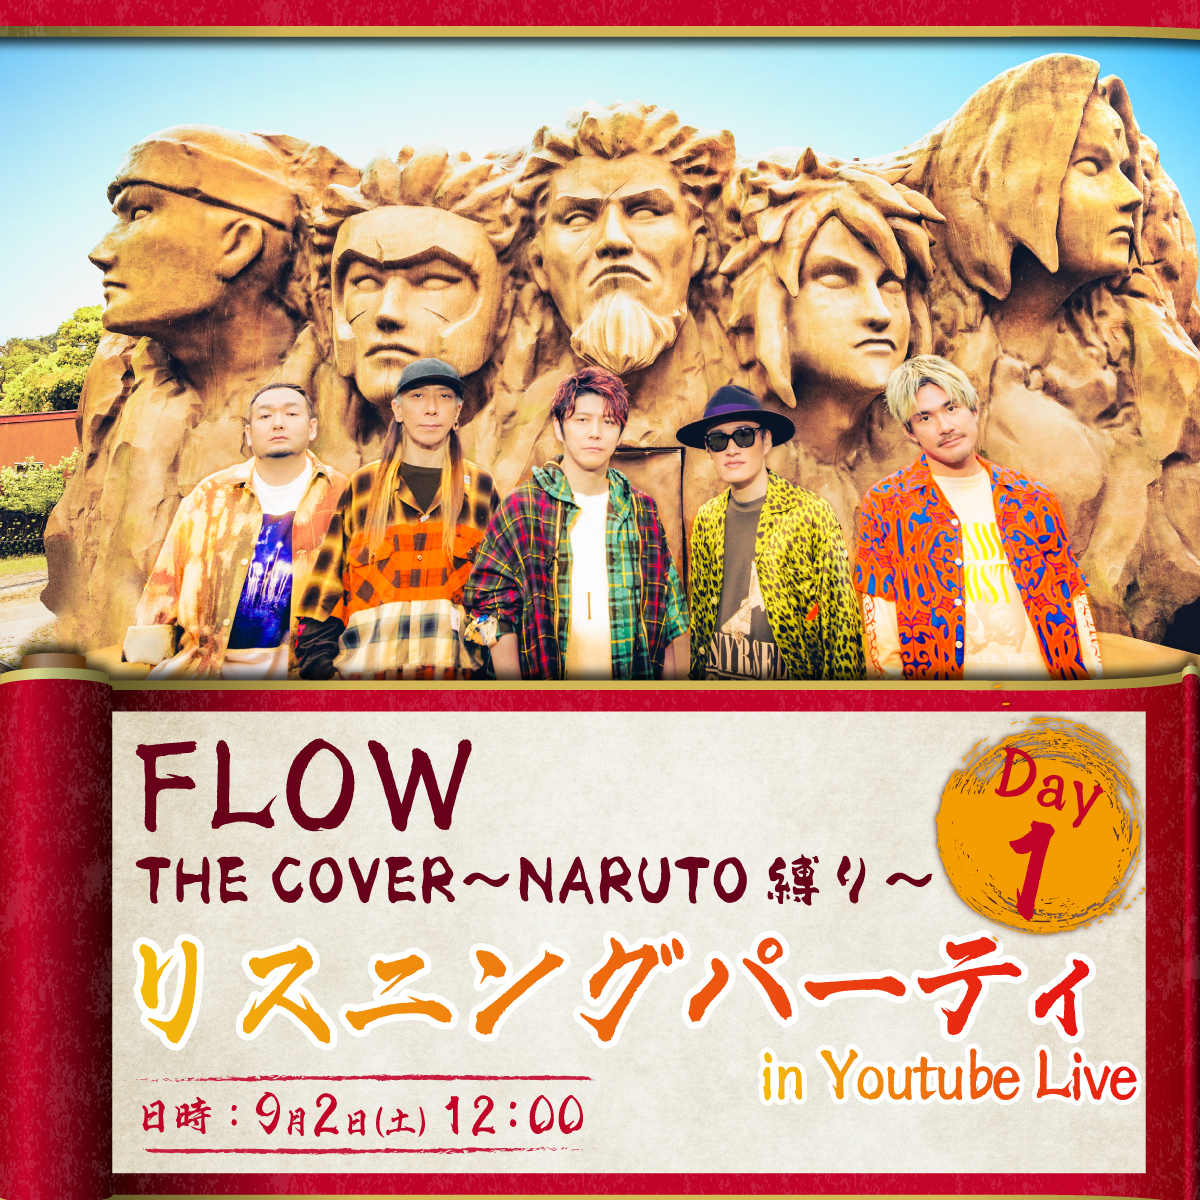 FLOW THE COVER ～NARUTO縛り～』リリース記念！リスニングパーティ